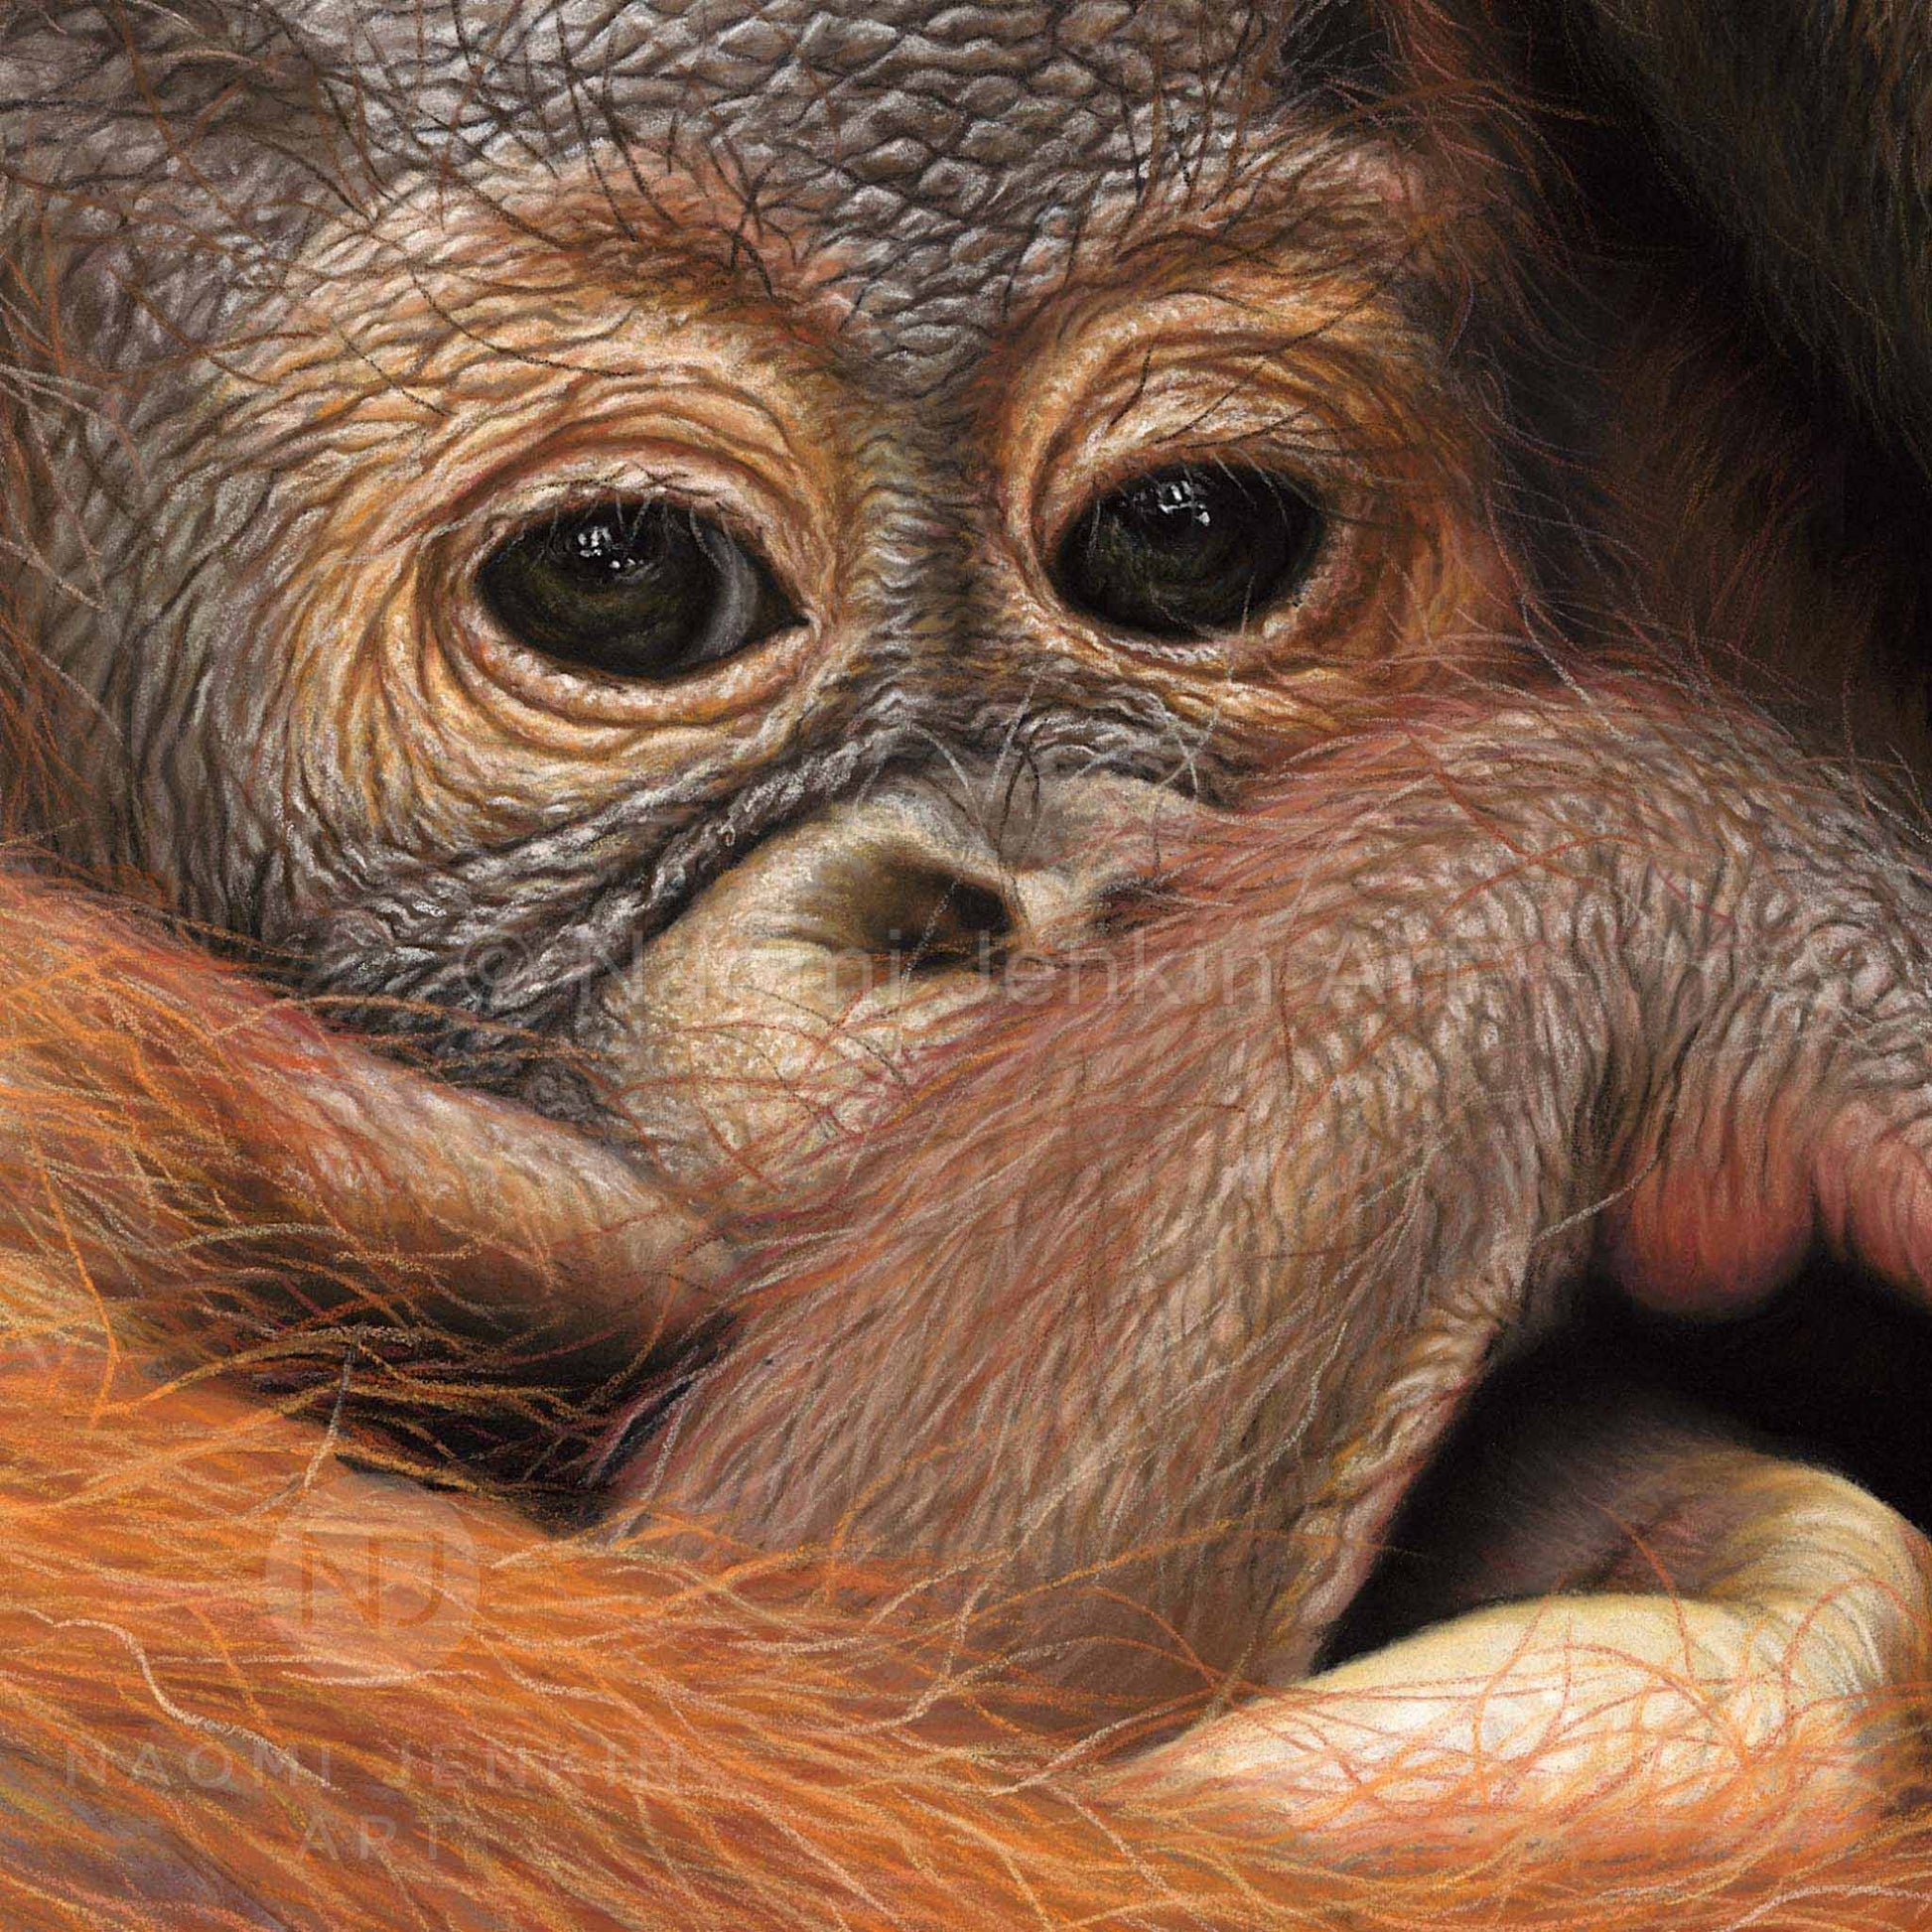 Close up orangutan baby drawing from the print 'Hold Me Closer' by Naomi Jenkin